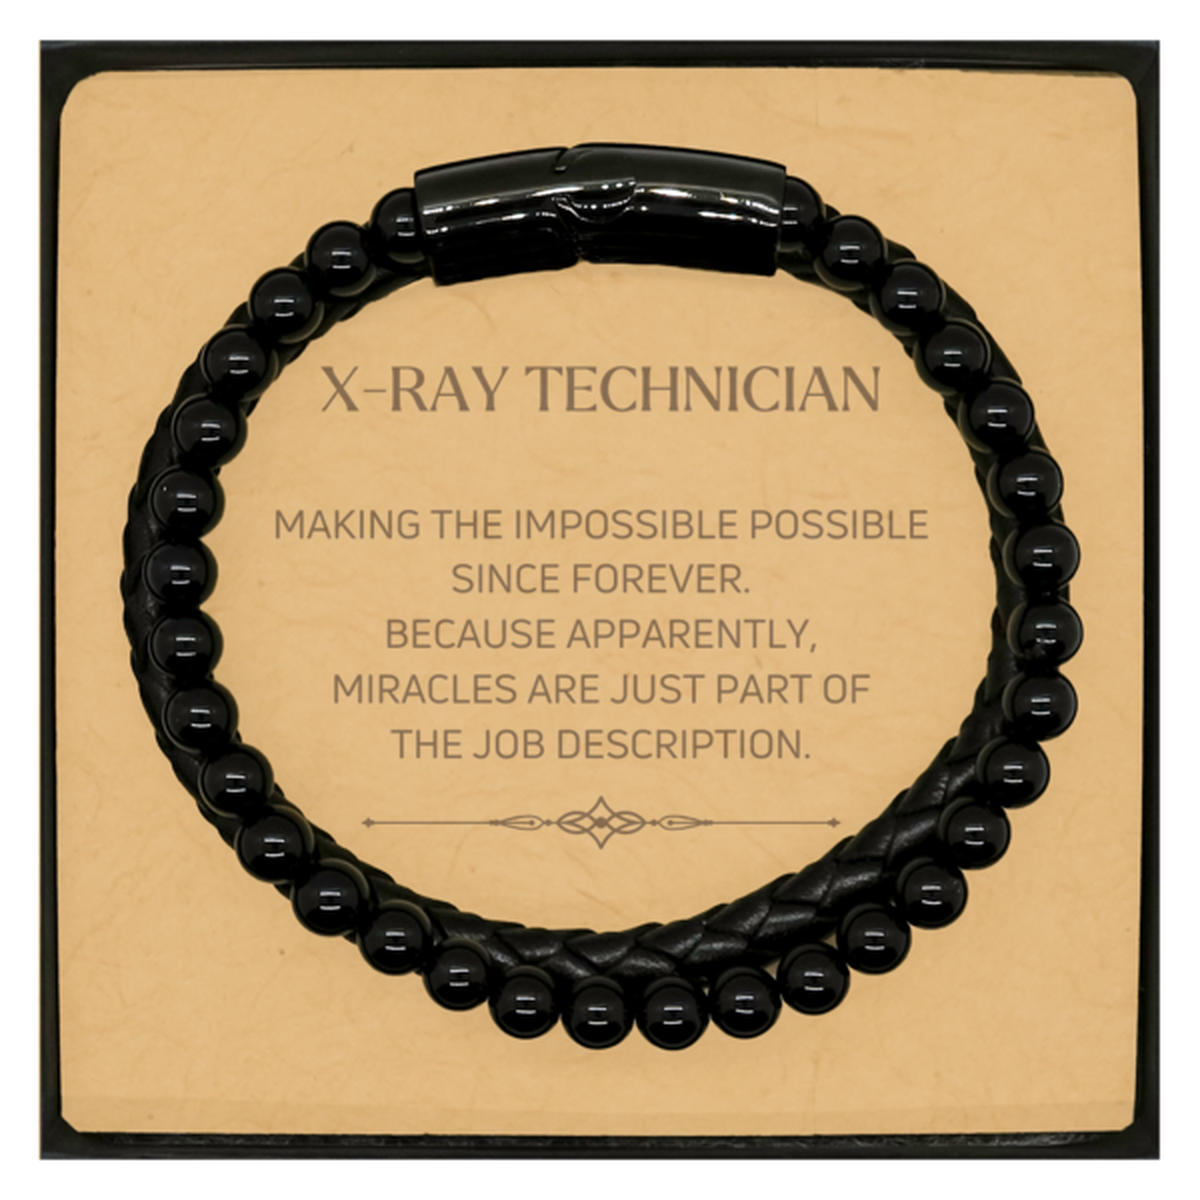 Funny X-Ray Technician Gifts, Miracles are just part of the job description, Inspirational Birthday Christmas Stone Leather Bracelets For X-Ray Technician, Men, Women, Coworkers, Friends, Boss